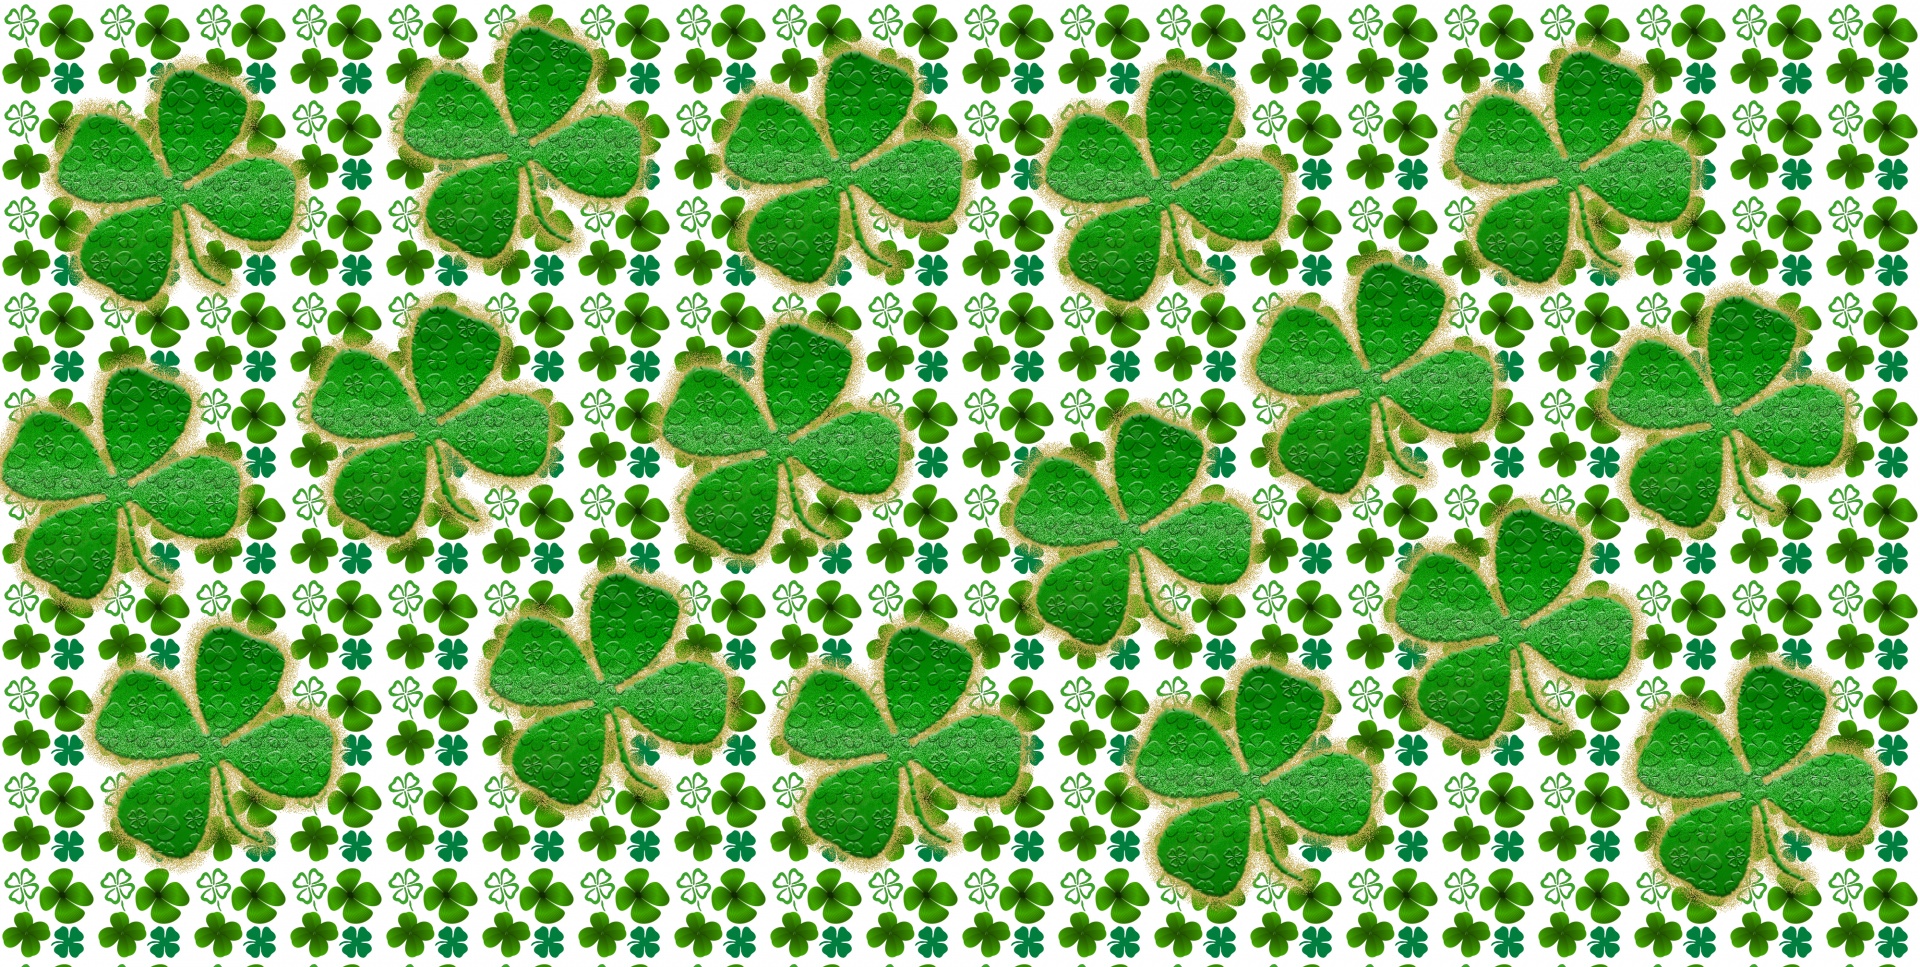 Background of clovers for St. Patrick's Day